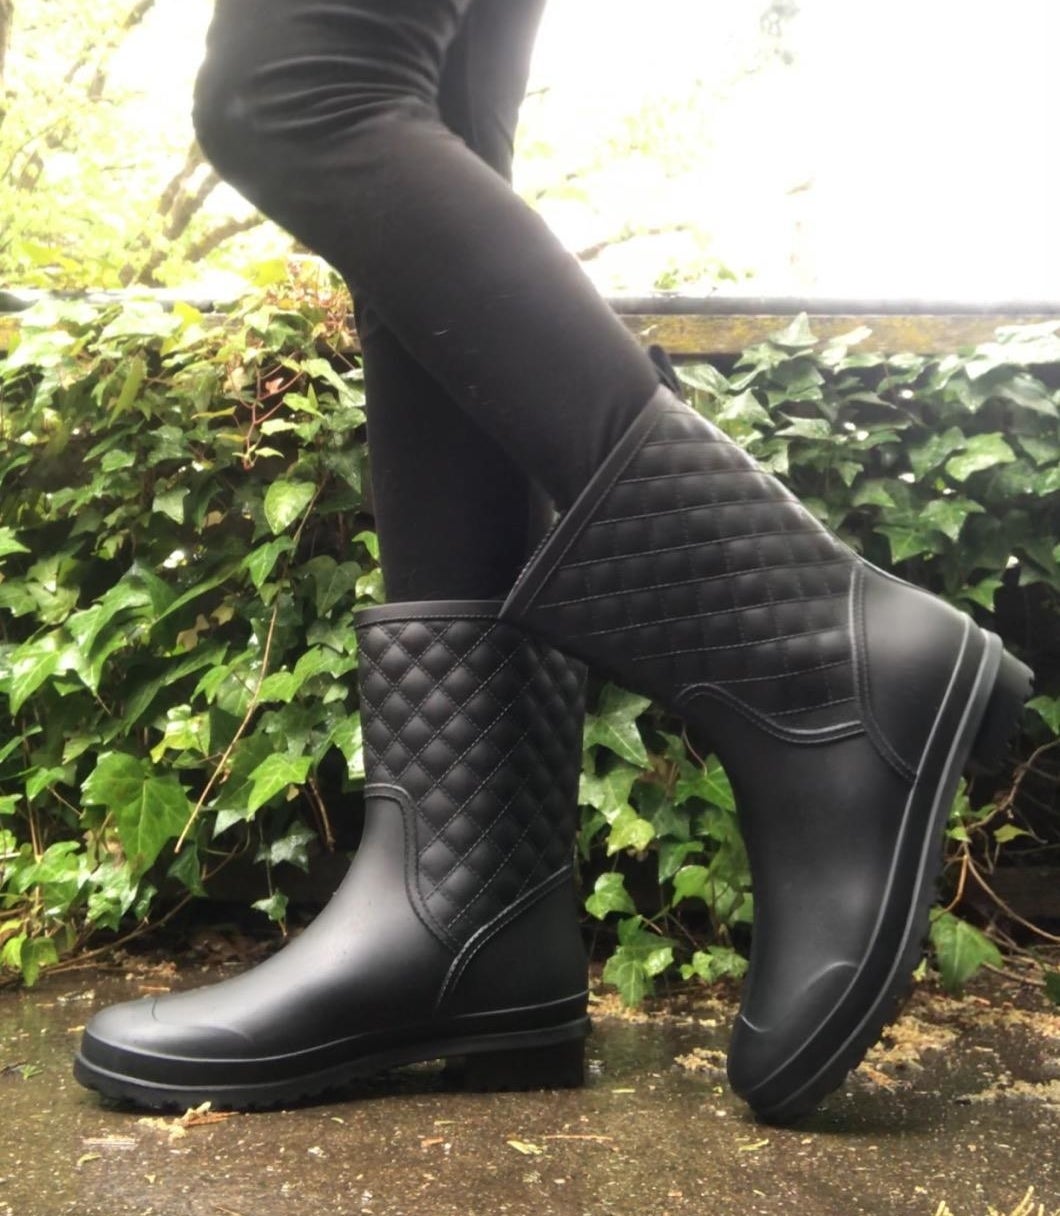 a reviewer photo of someone wearing black leggings and the rainboots outside 